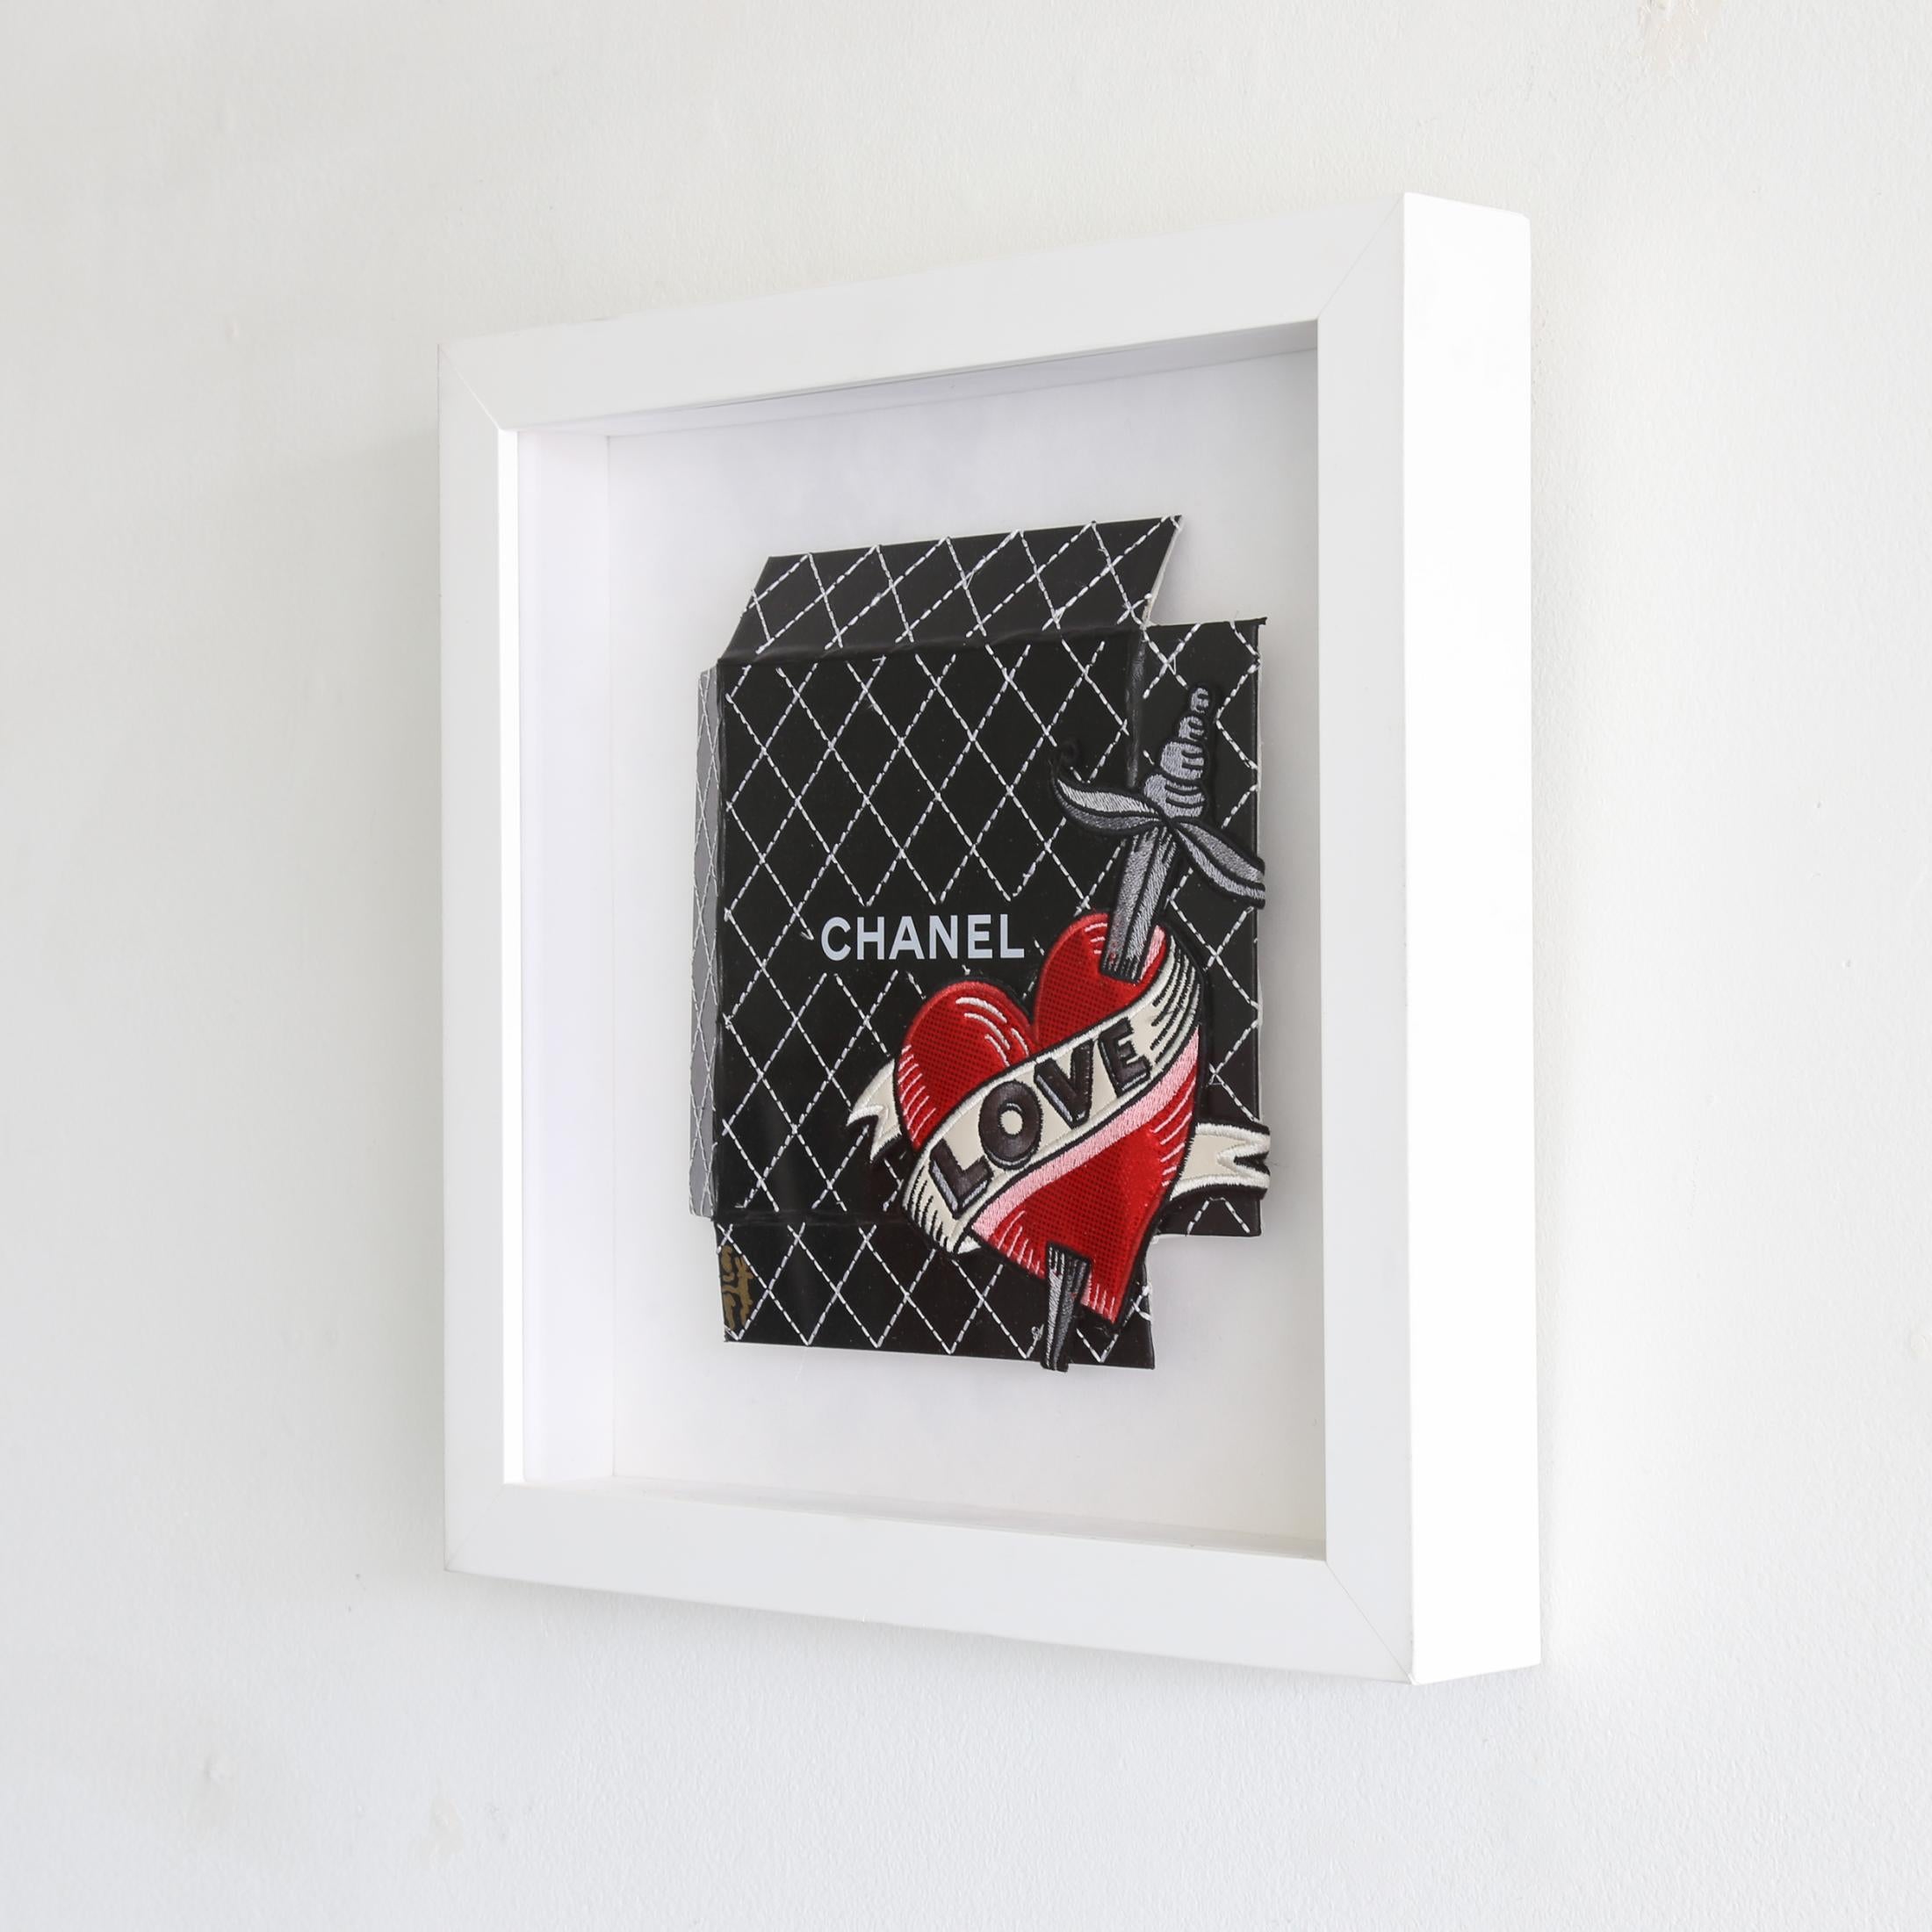 Chanel Love by artist Stephen Wilson is a contemporary black, red, grey, and white embroidered on luxury design box that measures 15.25 x 15.25 and is priced at $1,500.

